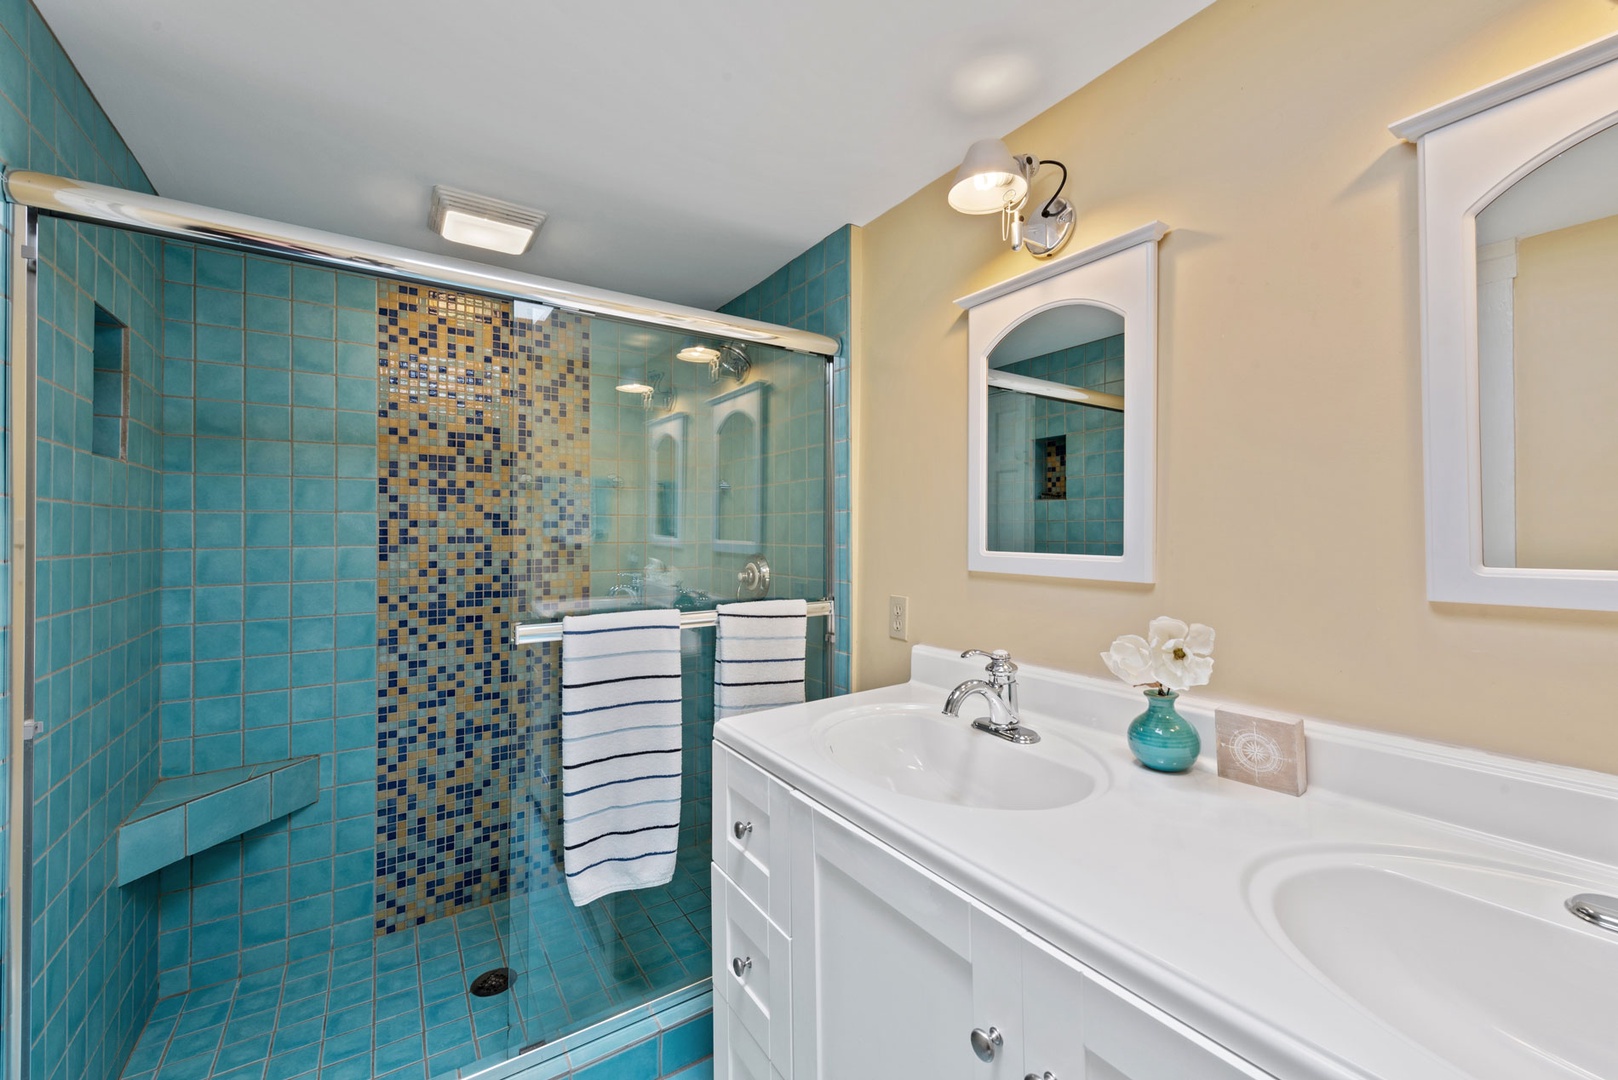 A second bathroom keeps the morning and evening routines on schedule.